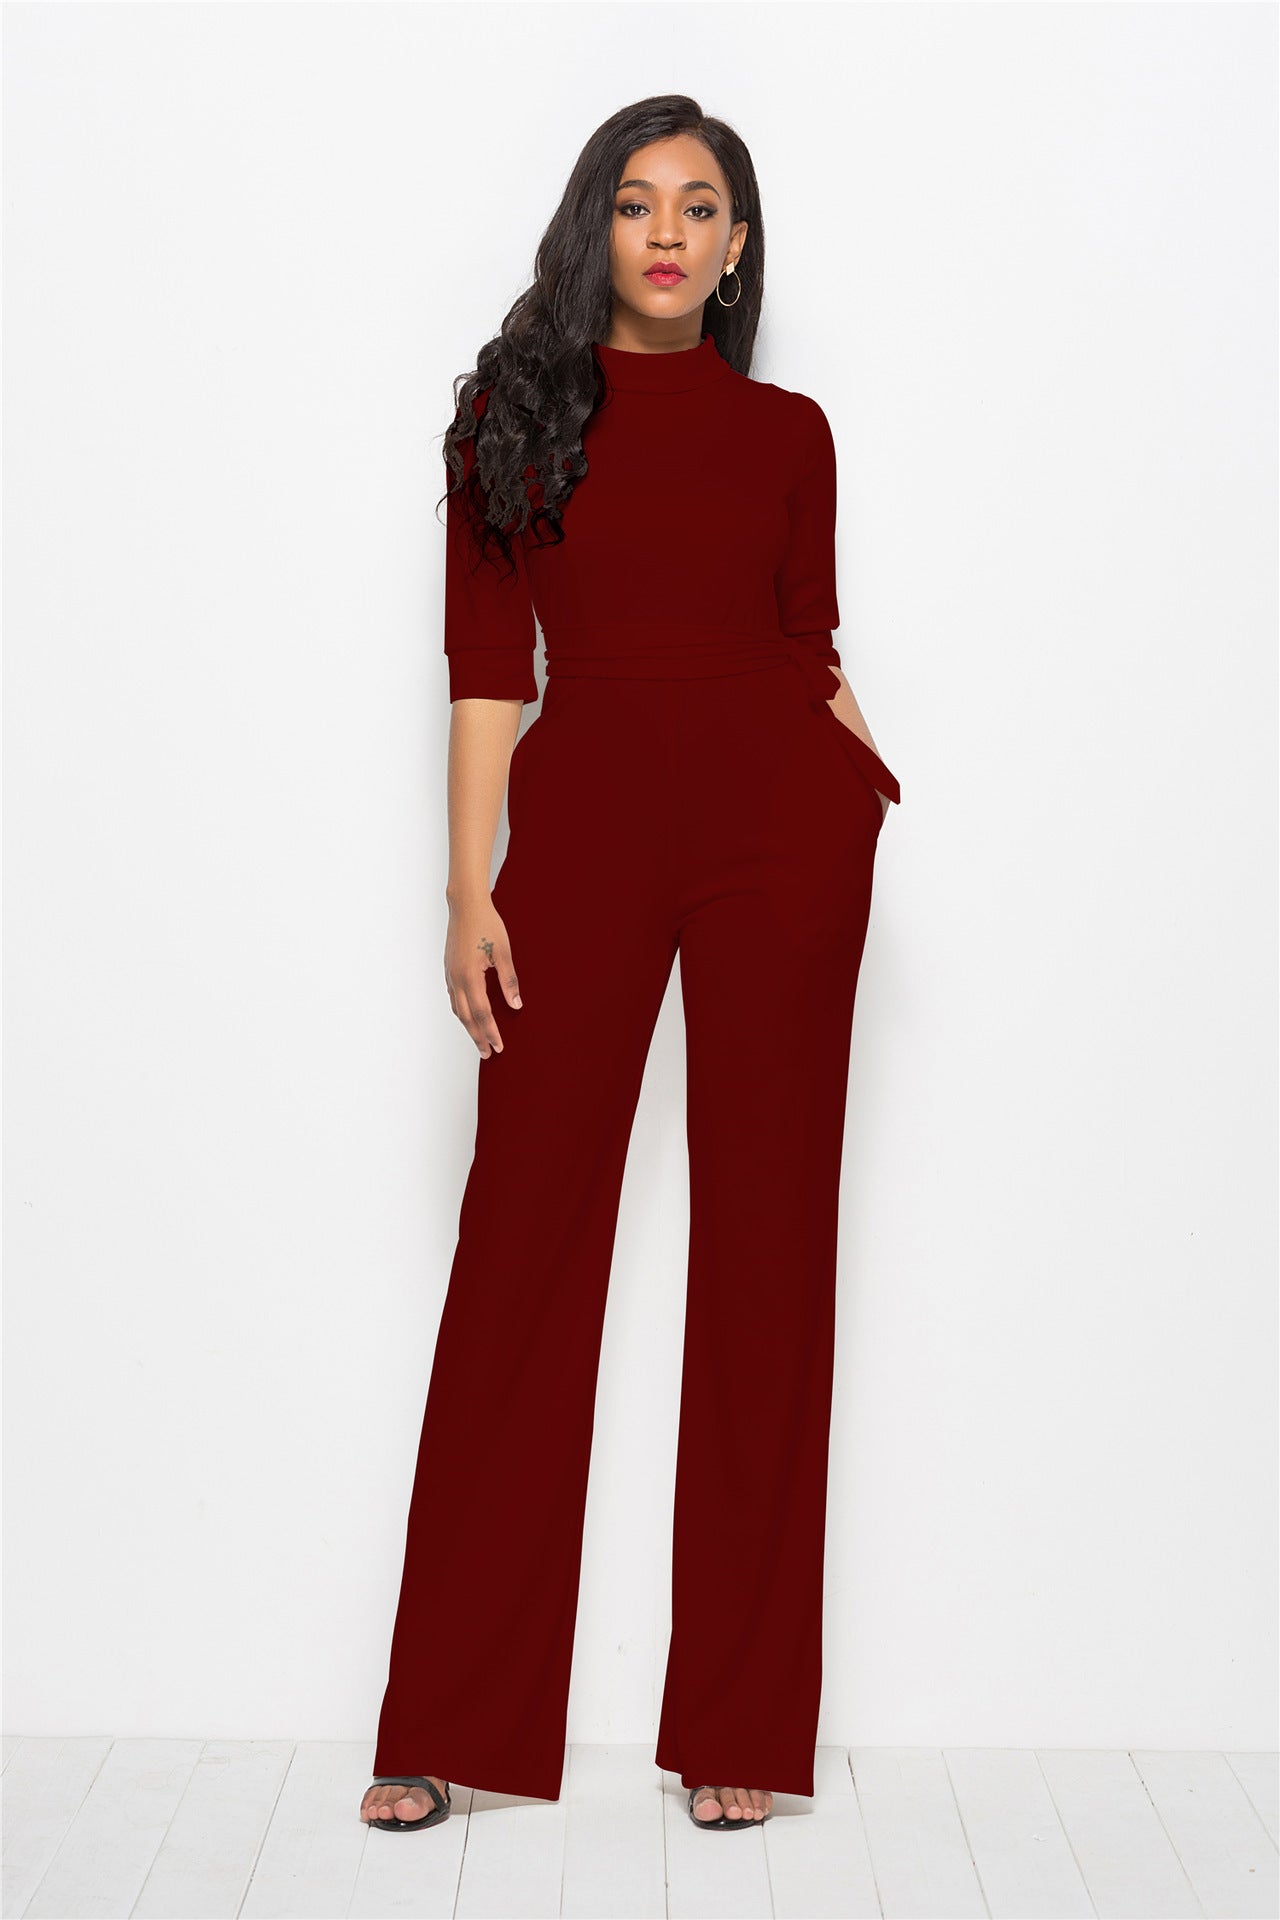 Sexy Fashion Women Fall Jumspuits-Women Suits-Wine Red-S-Free Shipping at meselling99